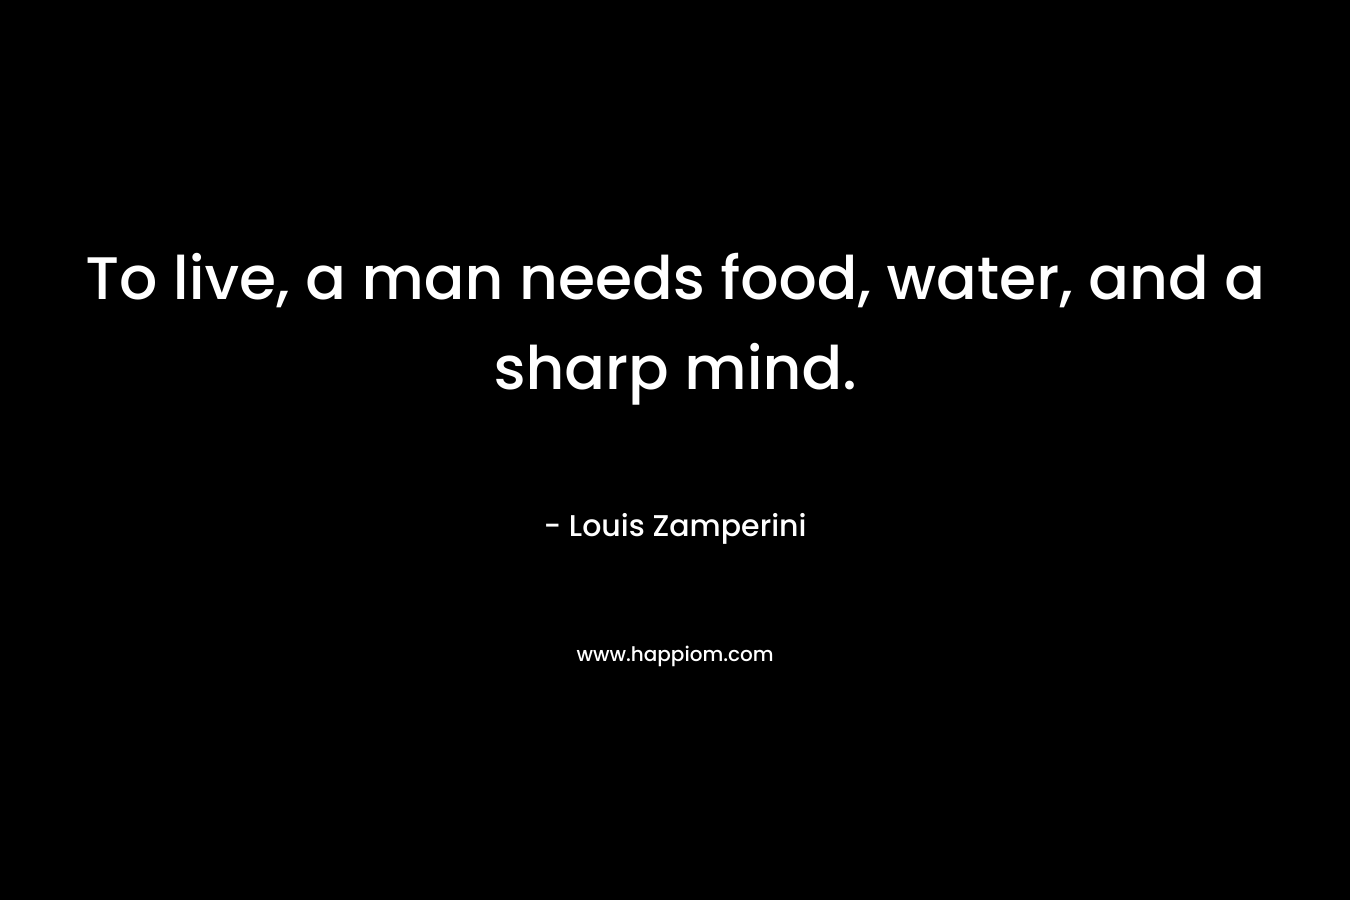 To live, a man needs food, water, and a sharp mind.